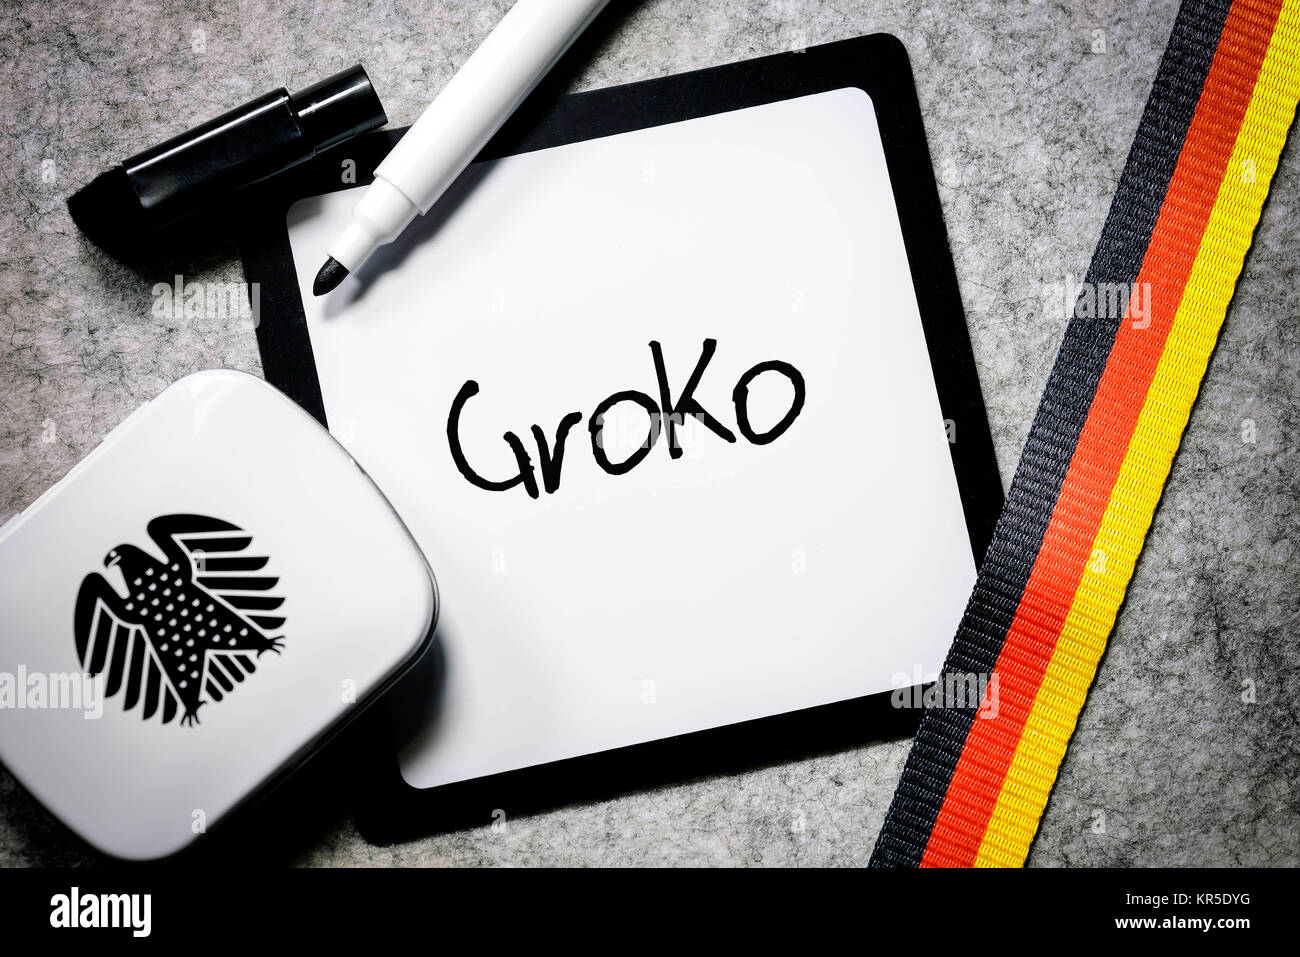 Writing board with the label GroKo, symbolic photo for grand coalition, Schreibtafel mit der Aufschrift GroKo, Symbolfoto für Große Koalition Stock Photo